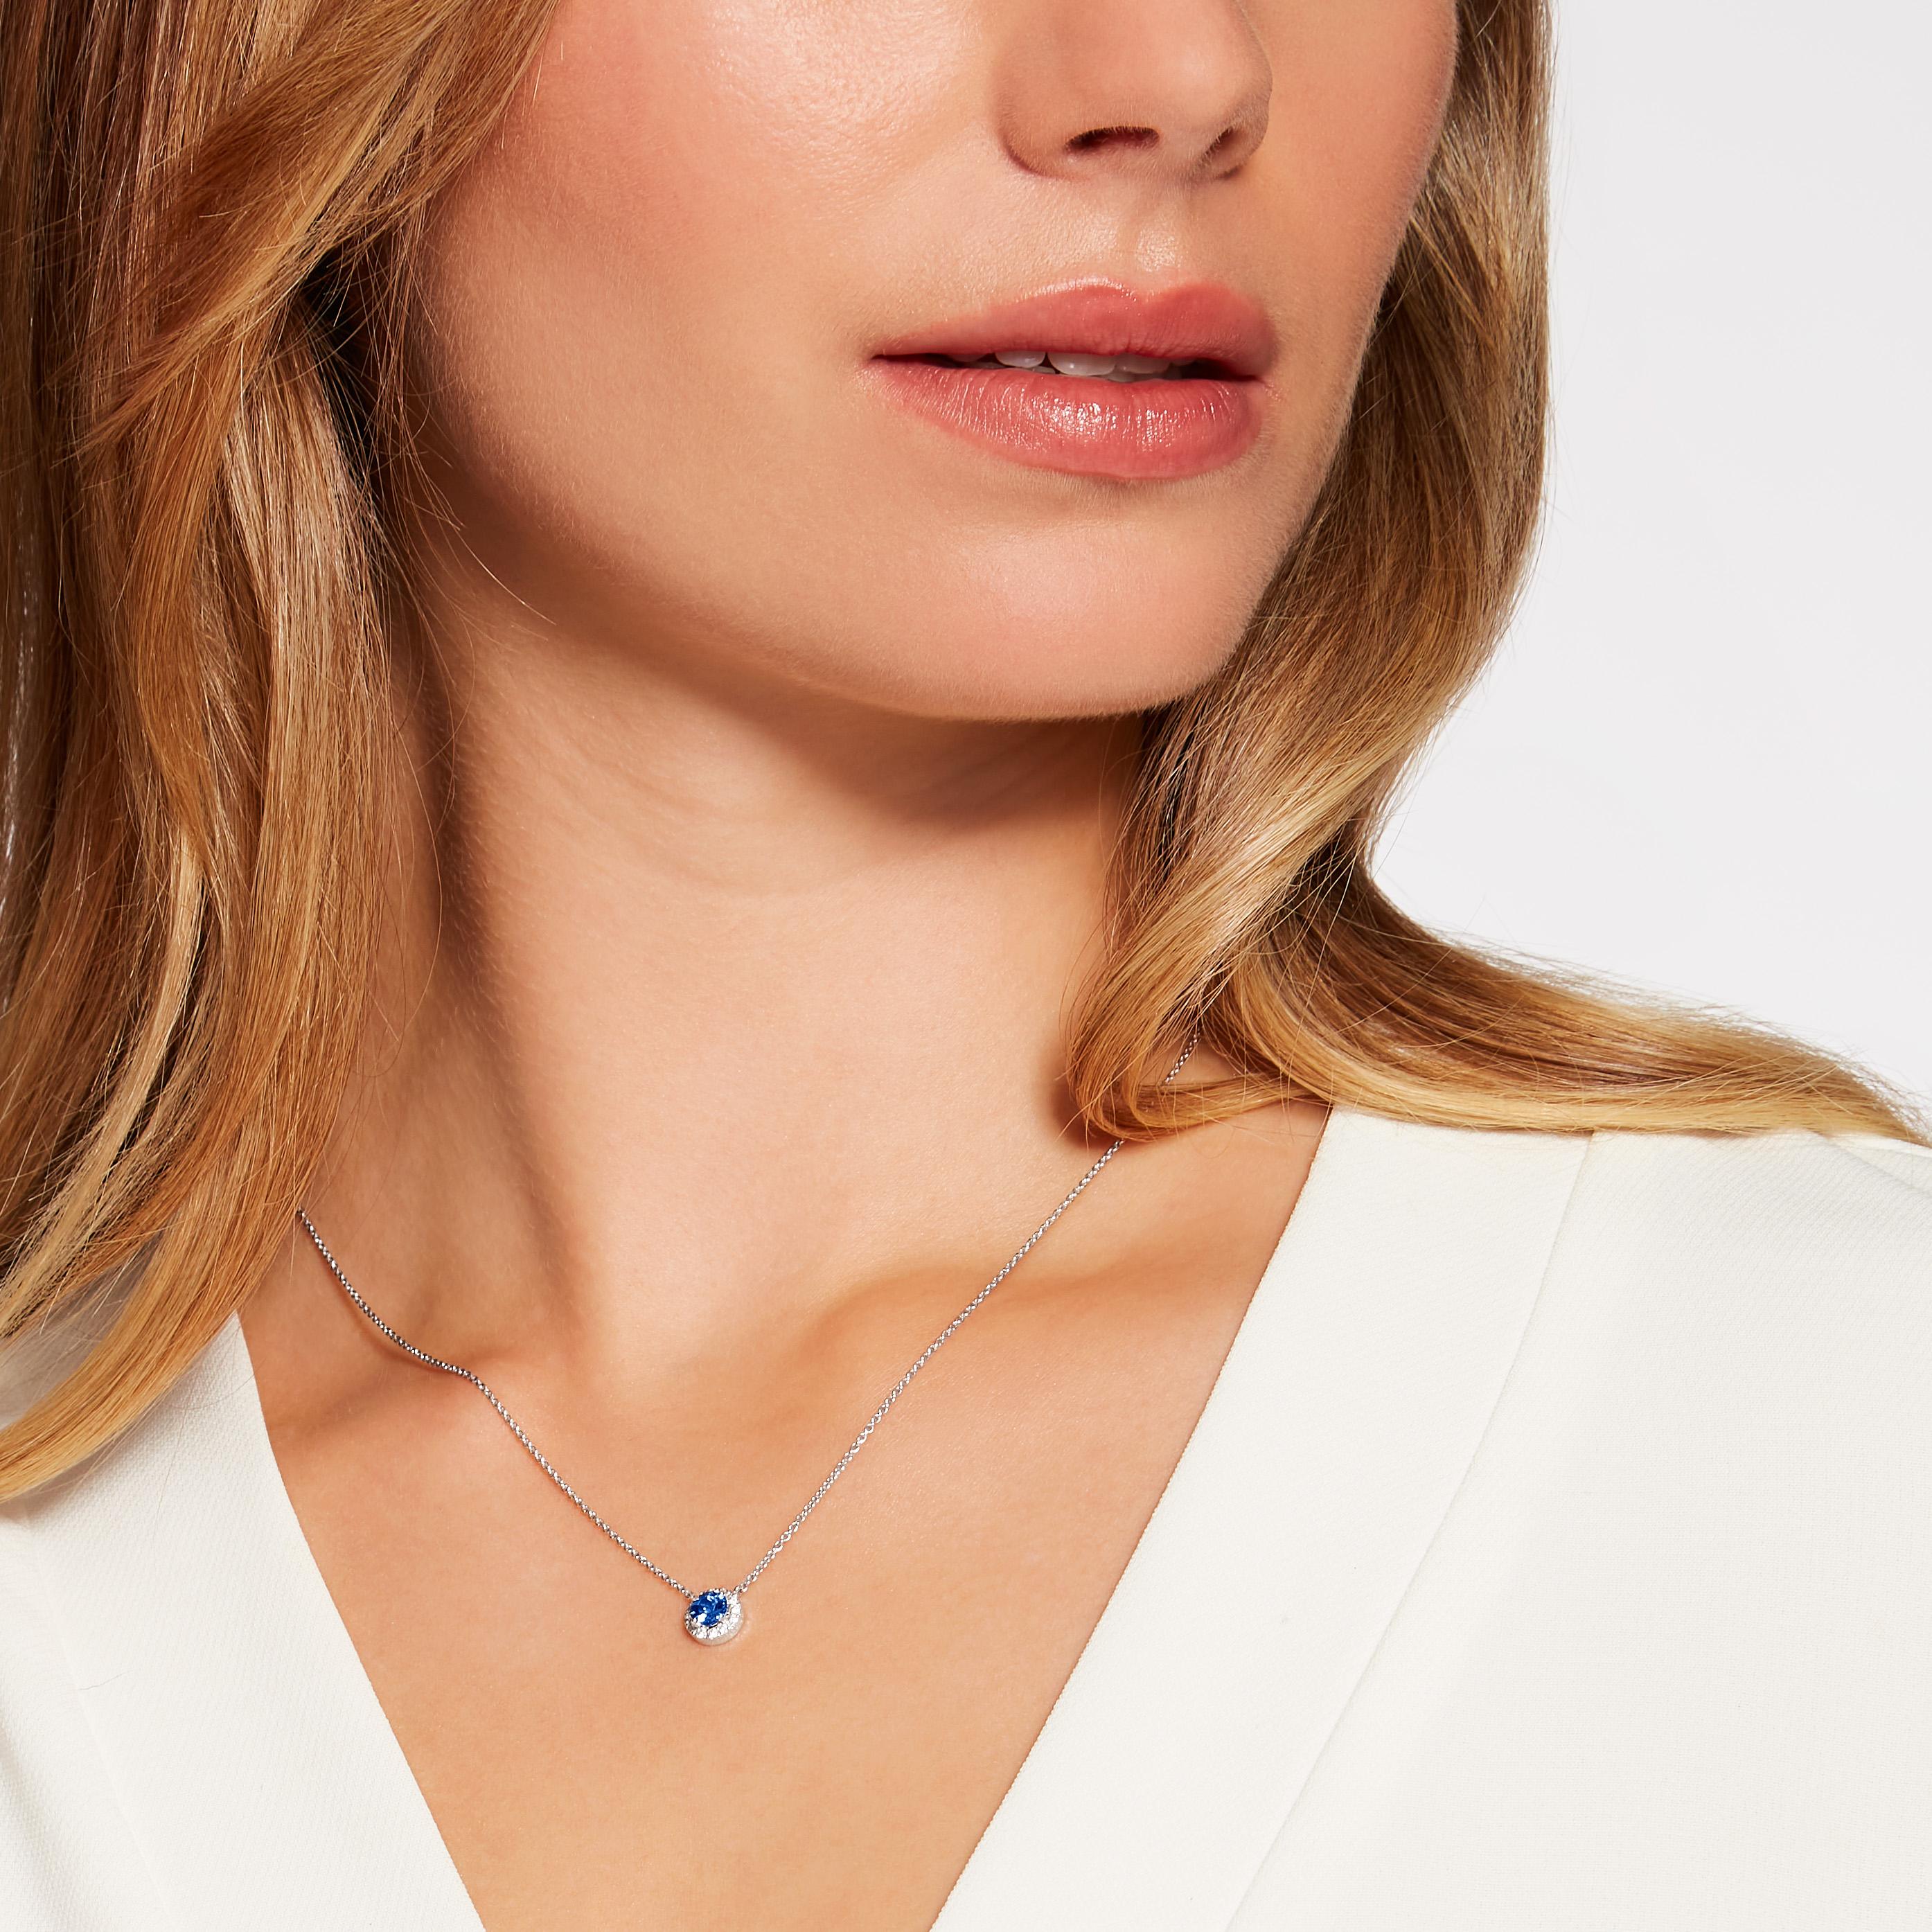 A mesmerising tanzanite of the prettiest colour, surrounded by diamonds in the Hirsh Regal setting. A perfect everyday pendant to take you from day to night.

- 1 round tanzanite weighing approx. 0.55 carats
- 12 brilliant cut diamonds weighing